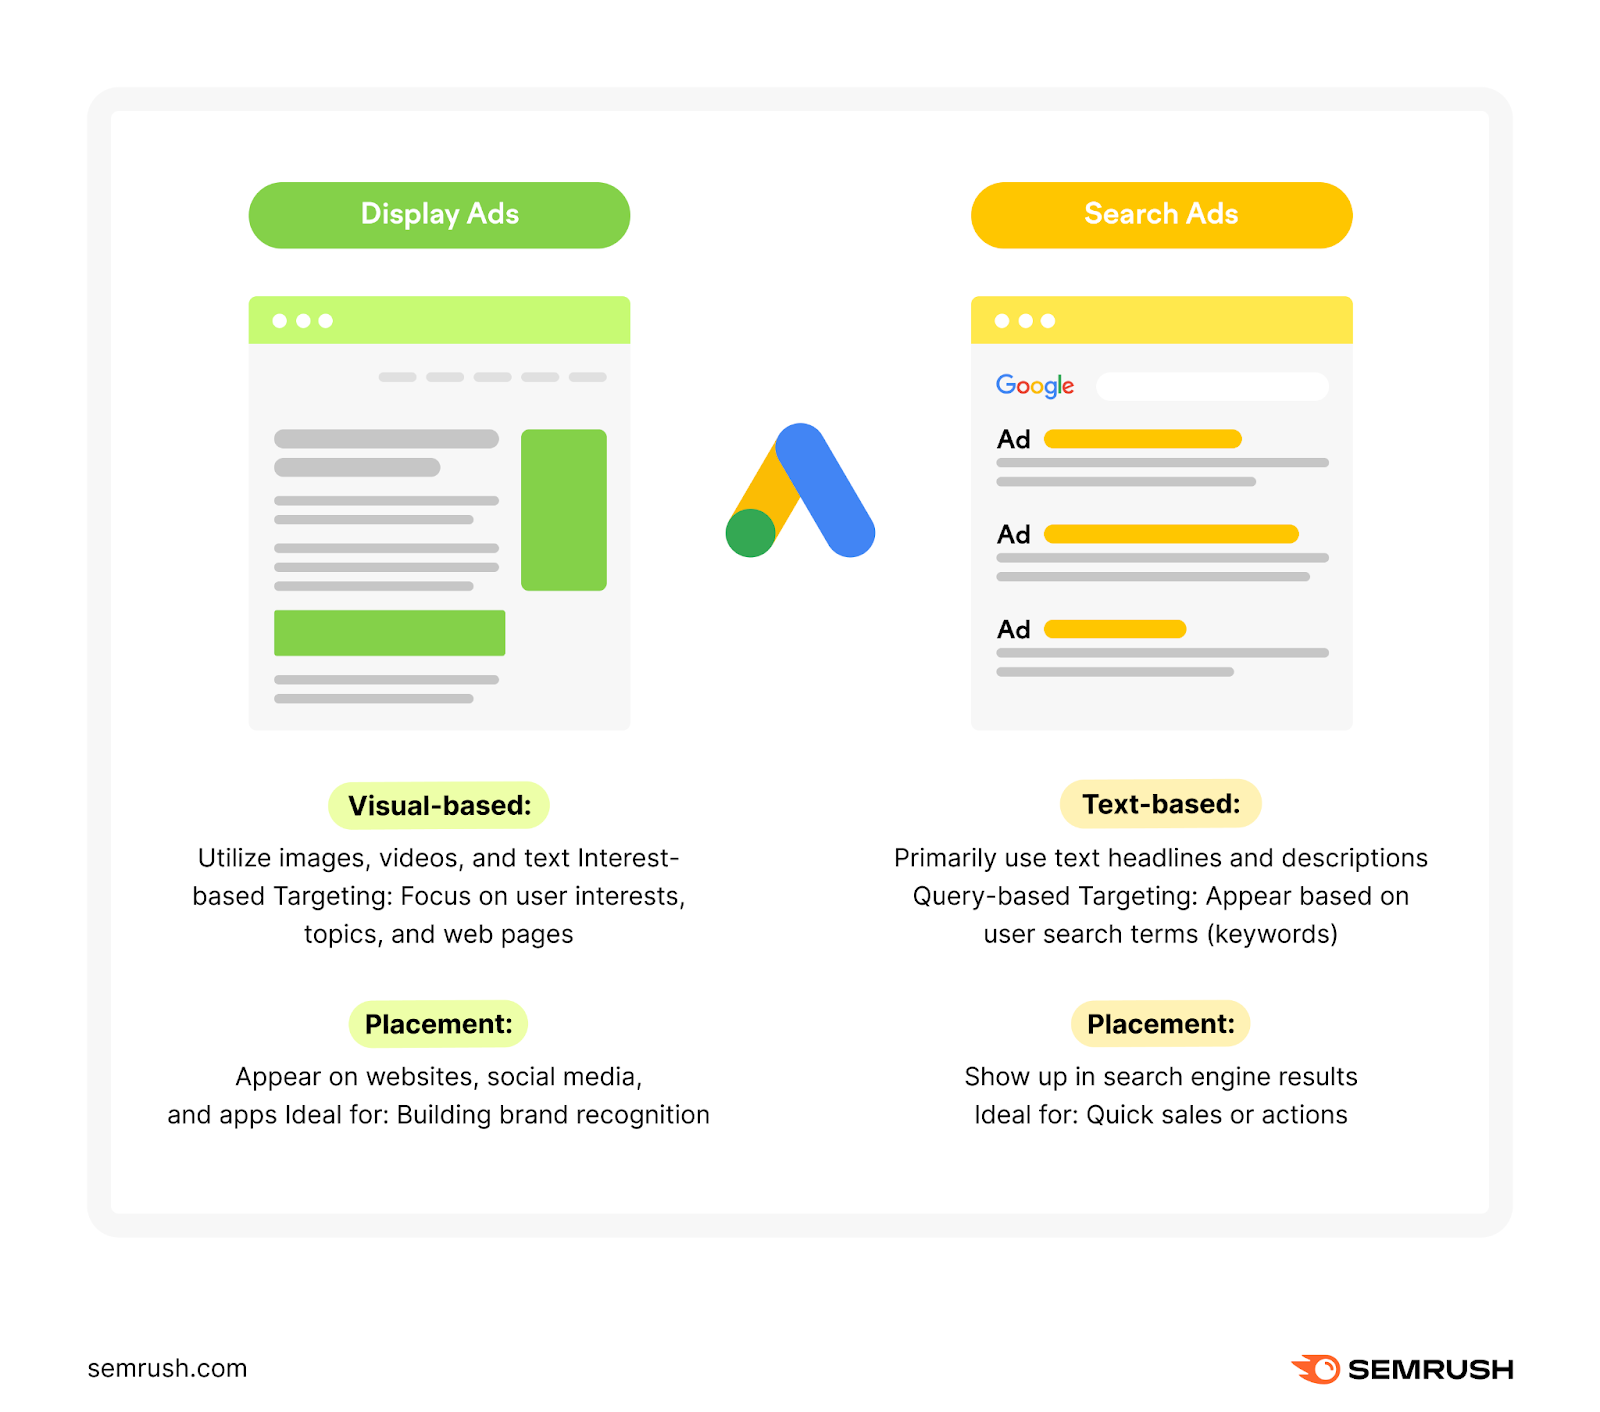 An infographic explaining what display ads are and how they differ from search ads